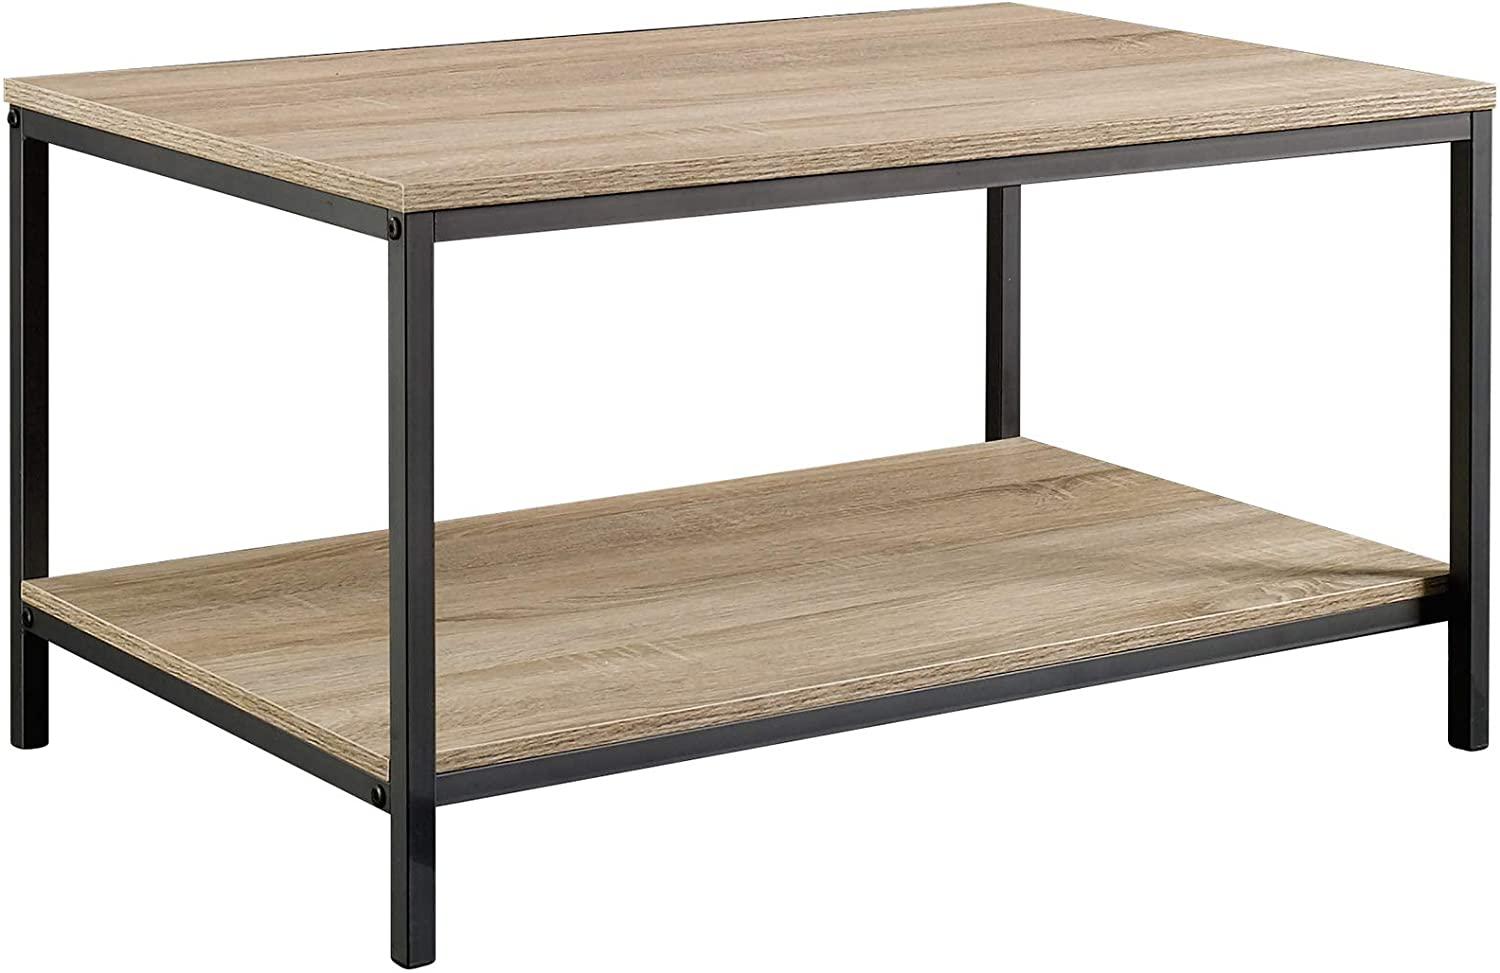 Sauder North Avenue Coffee Table for $30 Shipped